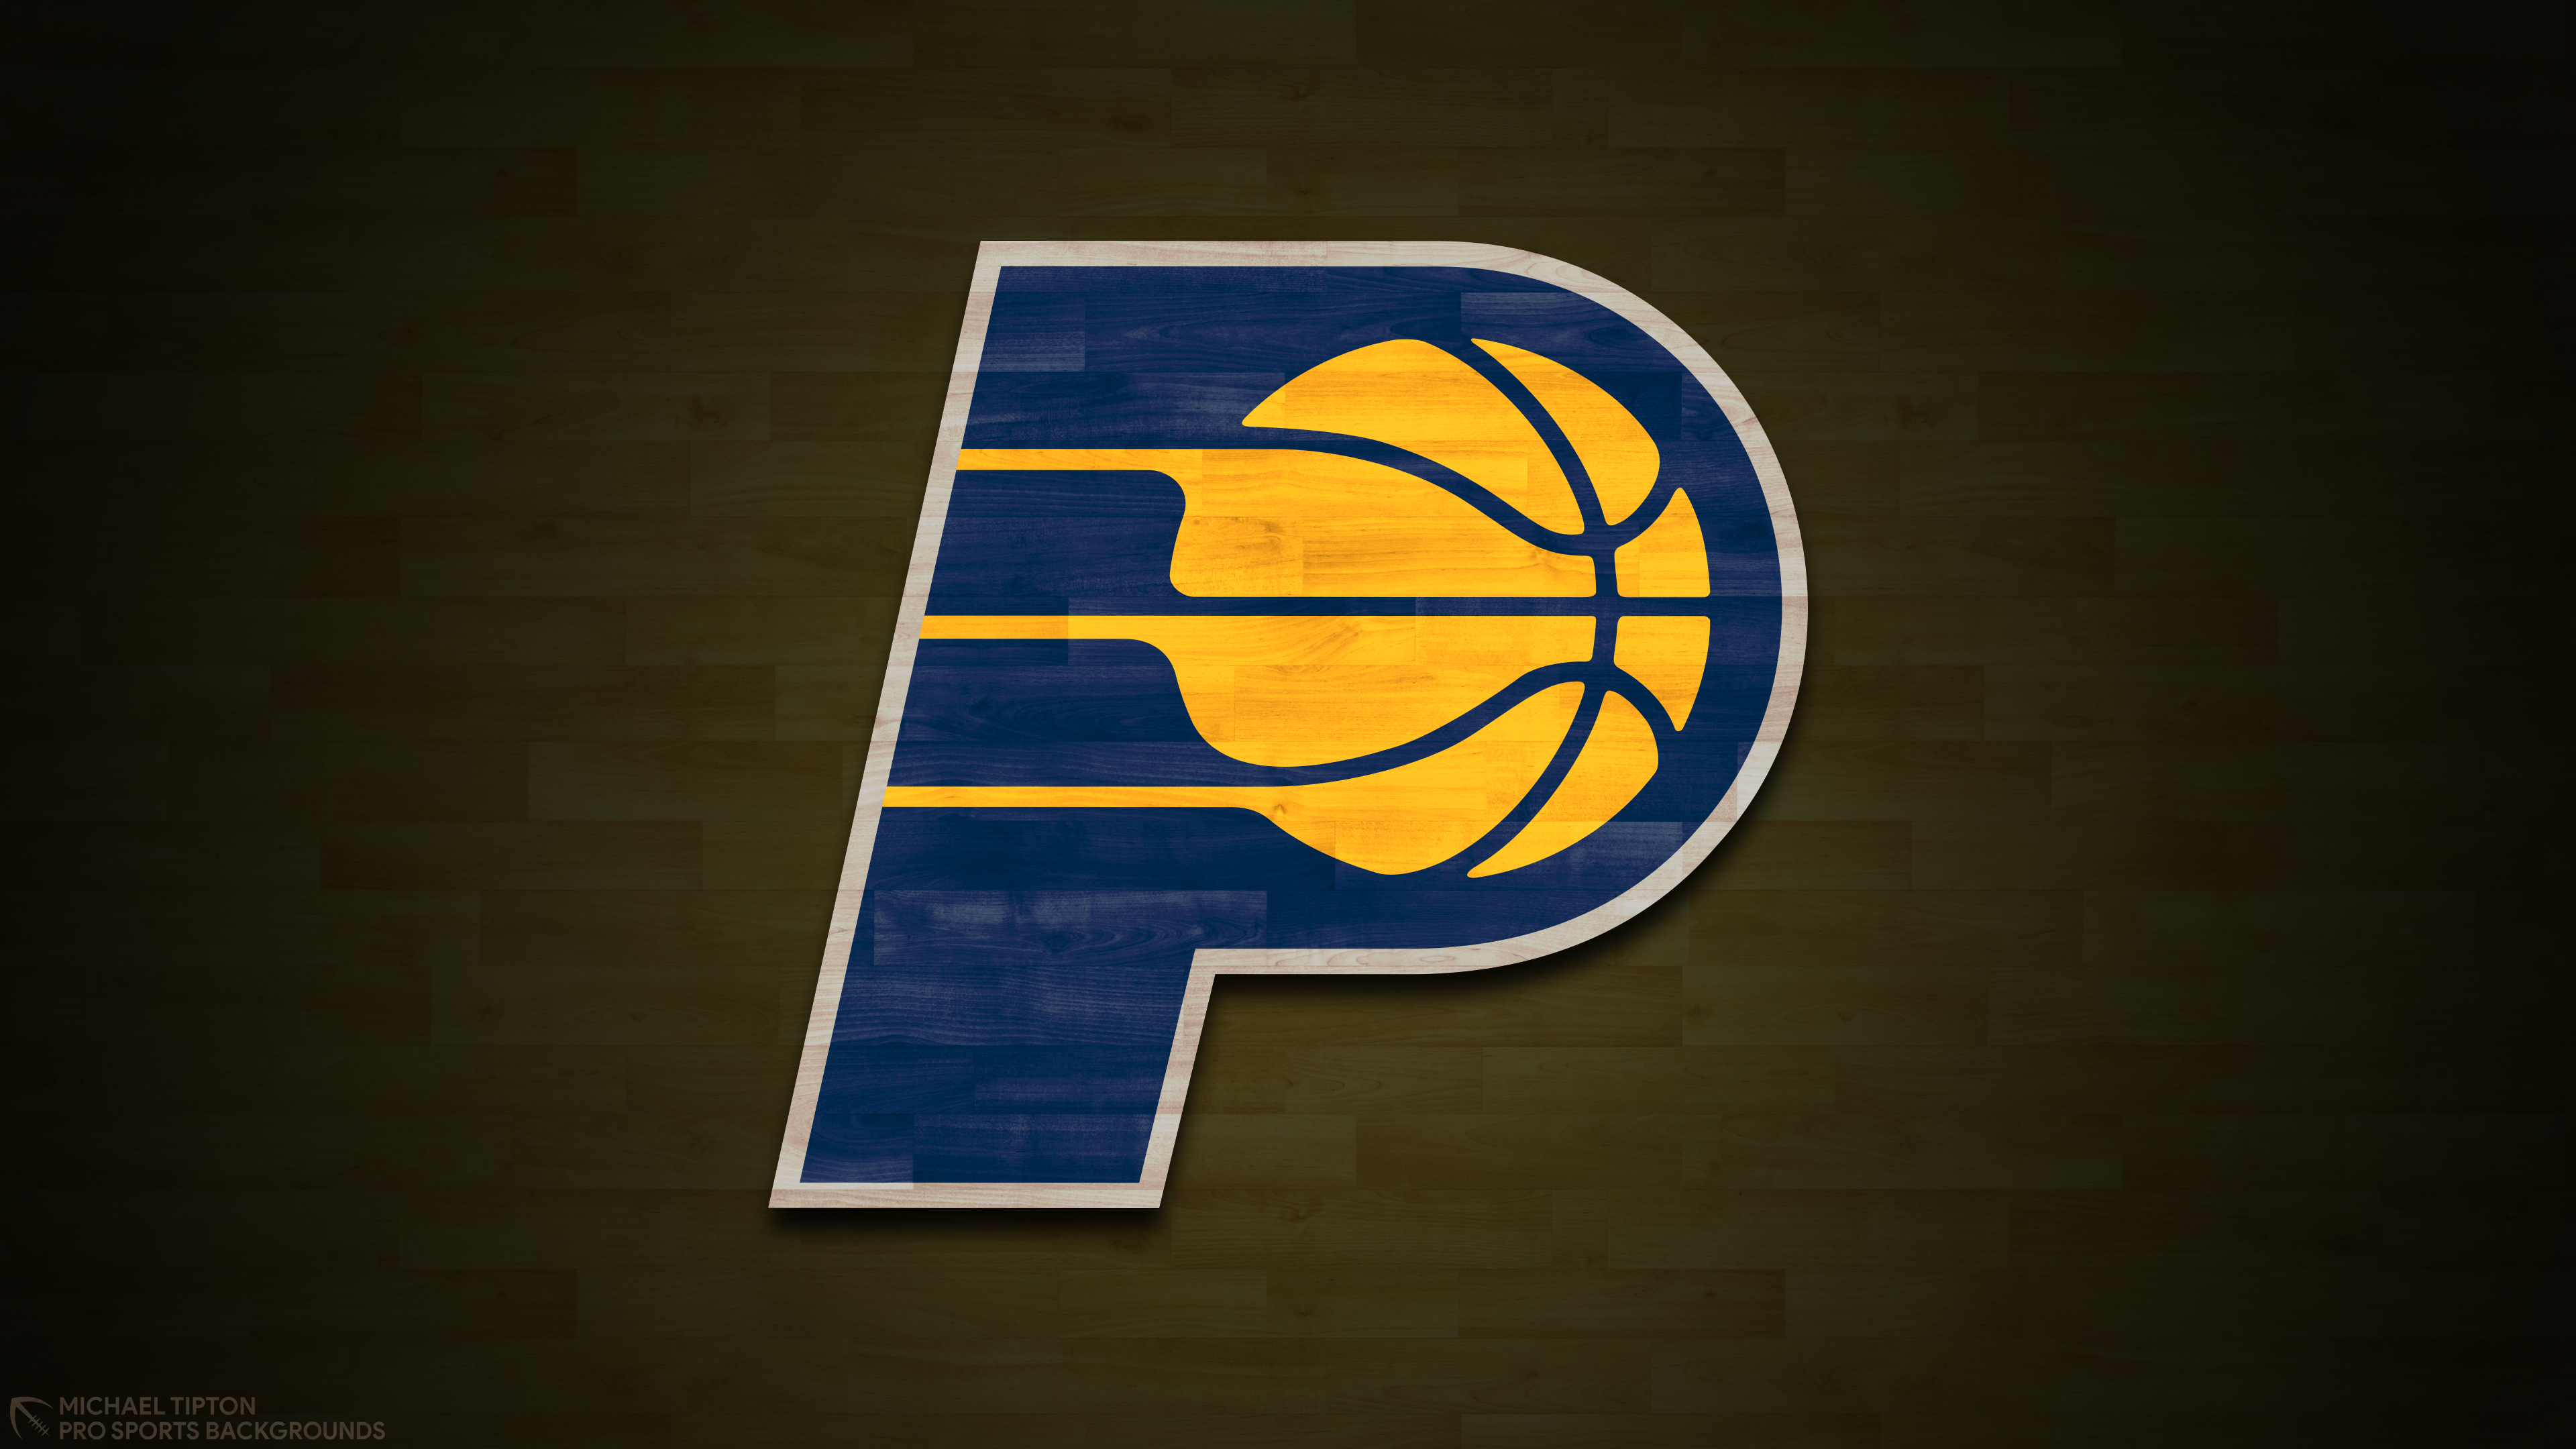 Indiana Pacers 4k Ultra HD Wallpaper. Background Image